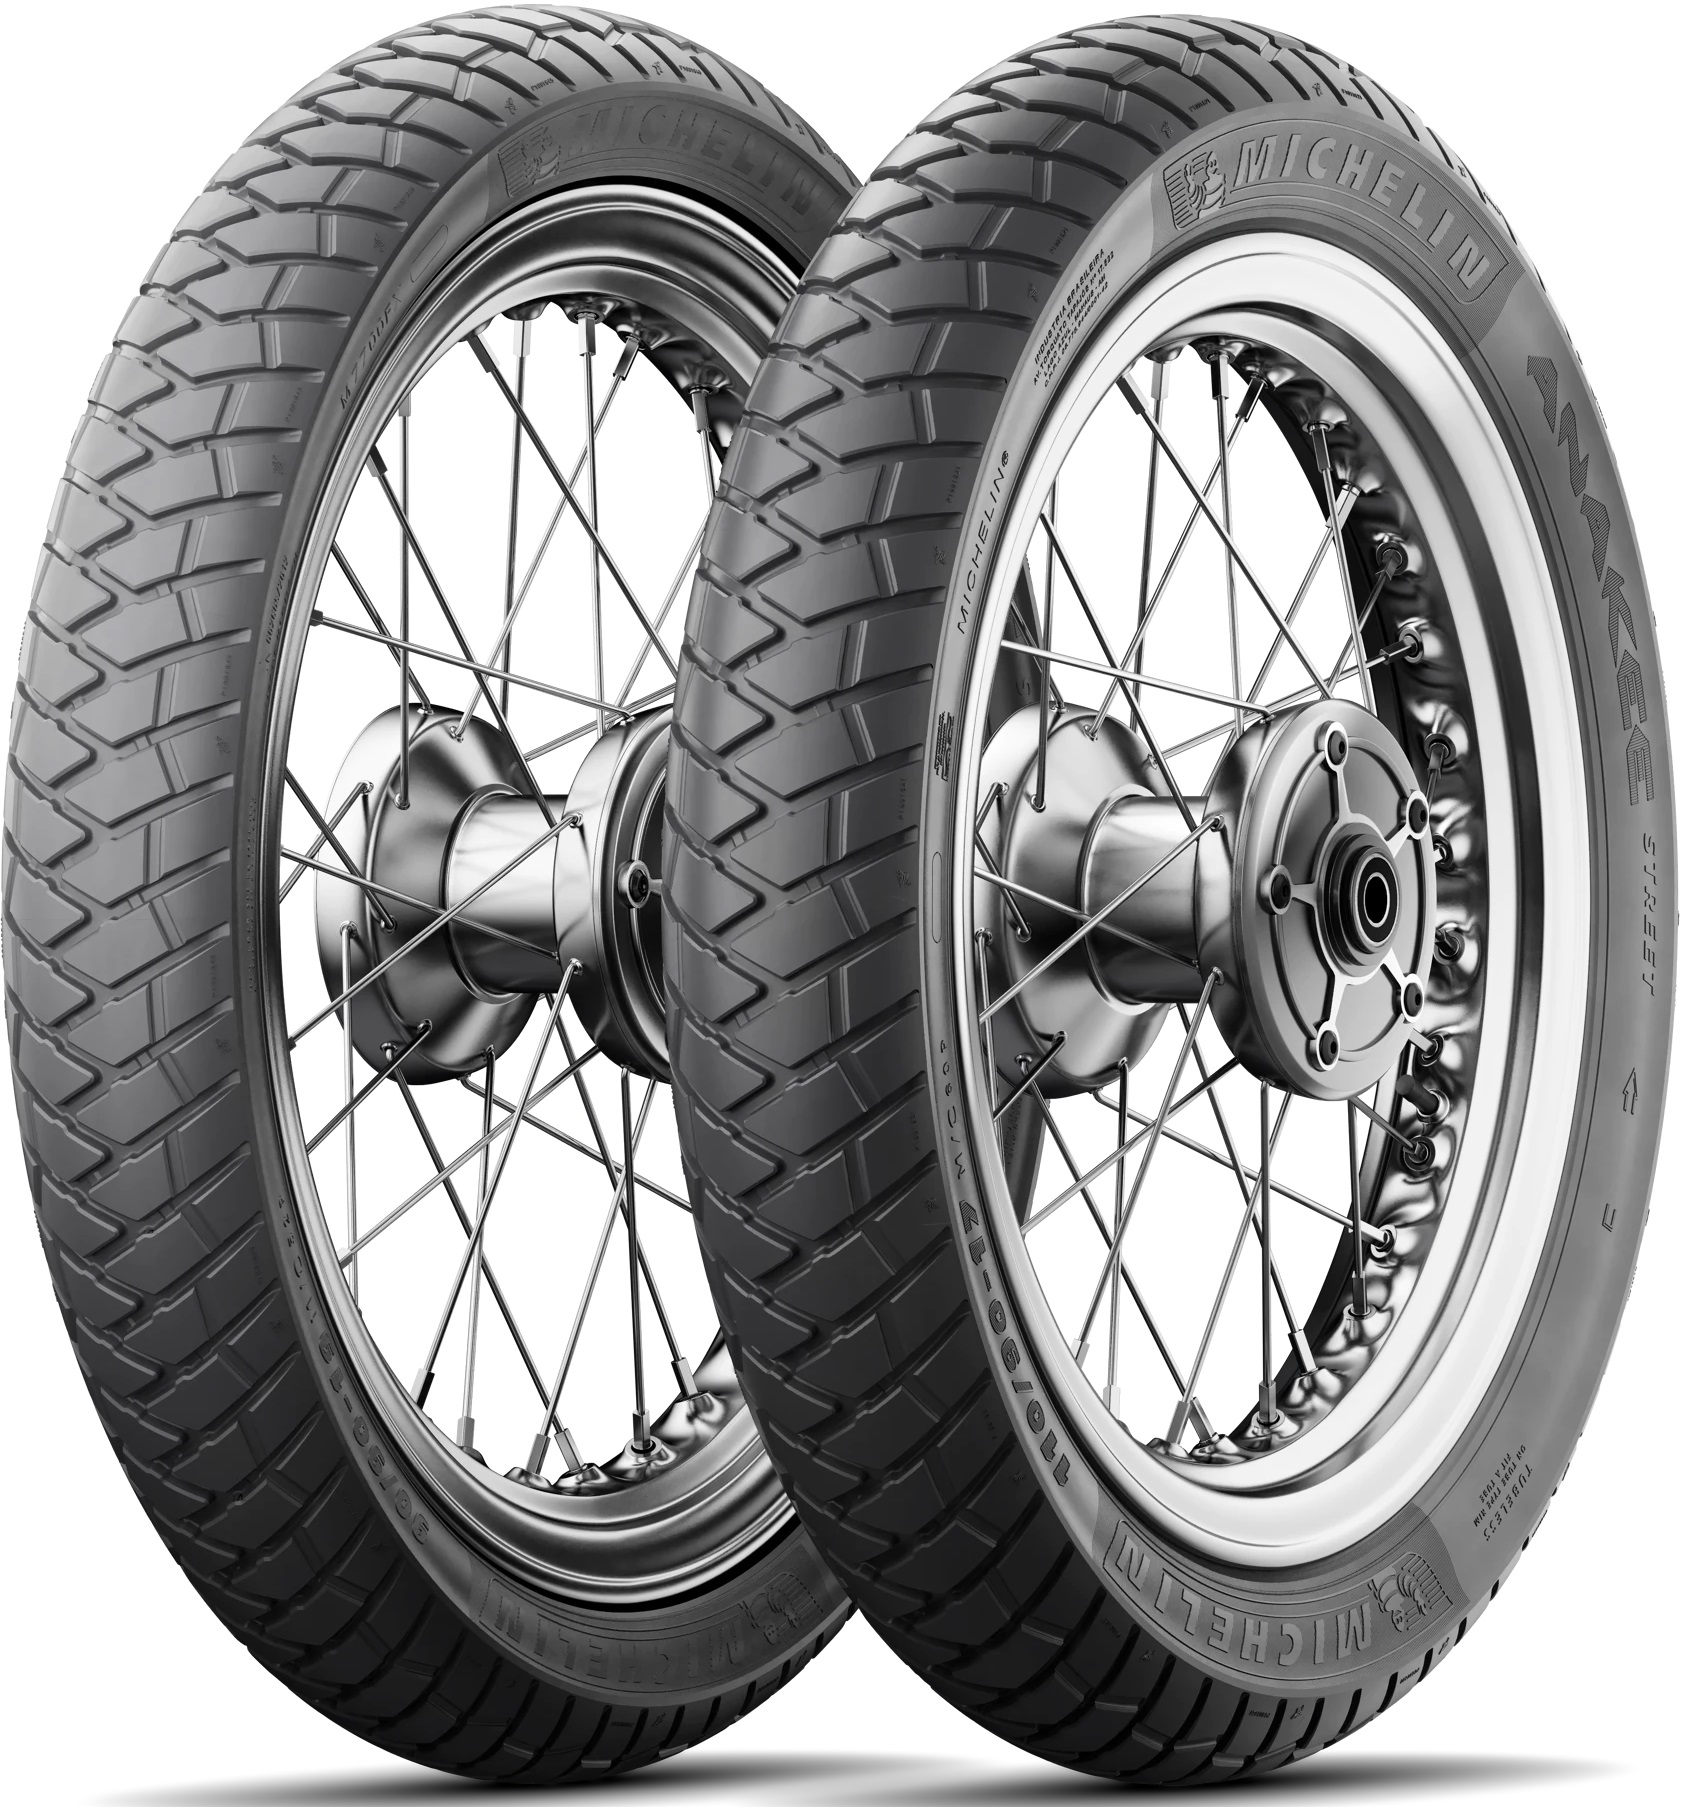 MICHELIN ANAKEE STREET 80/90 R 21 48S